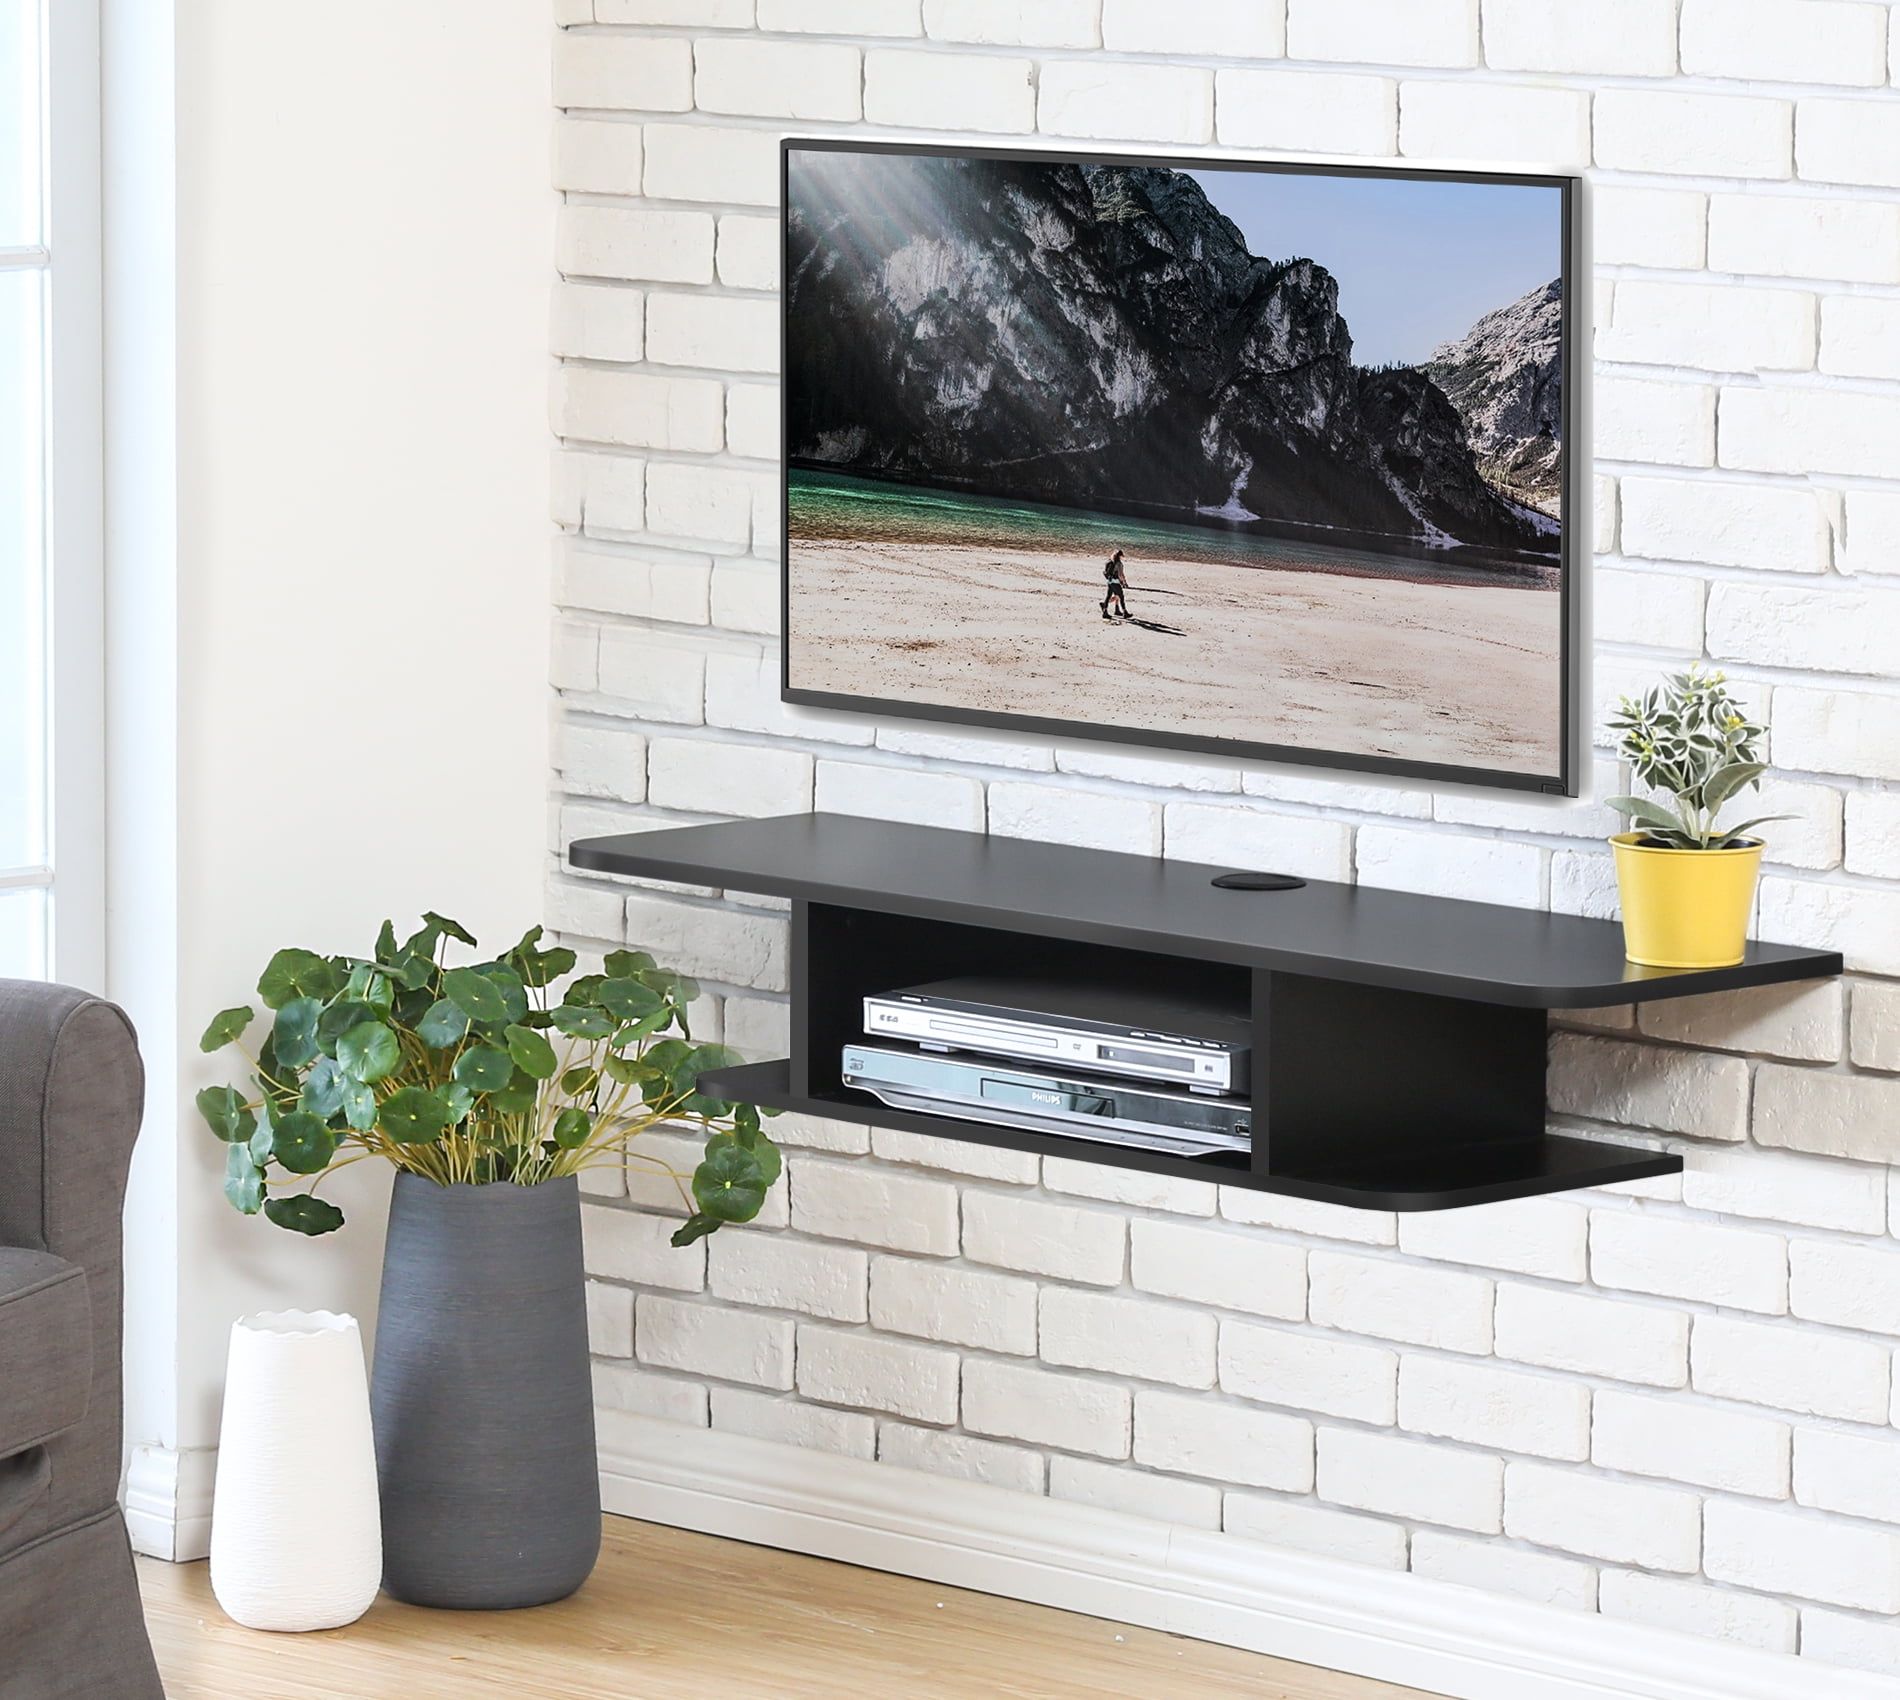 Fitueyes Wall Mounted Media Console,floating Tv Stand Component Shelf Regarding Wall Mounted Floating Tv Stands (Gallery 18 of 20)